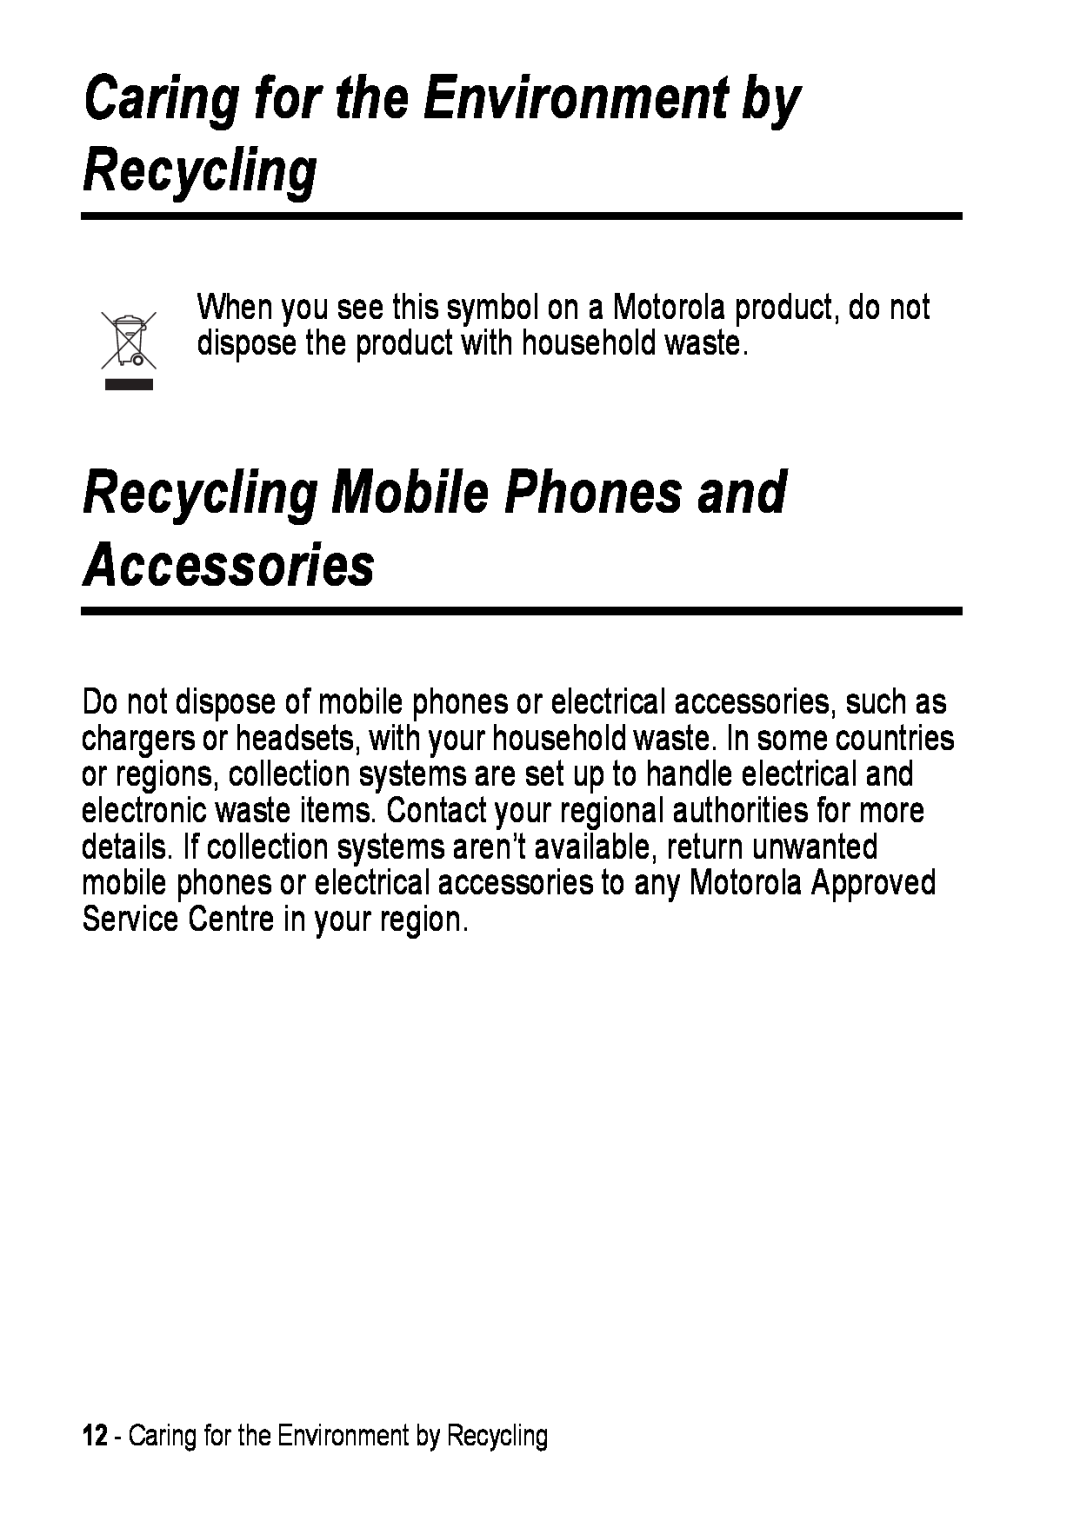 Motorola C390 manual Recycling Mobile Phones and Accessories, Caring for the Environment by Recycling 